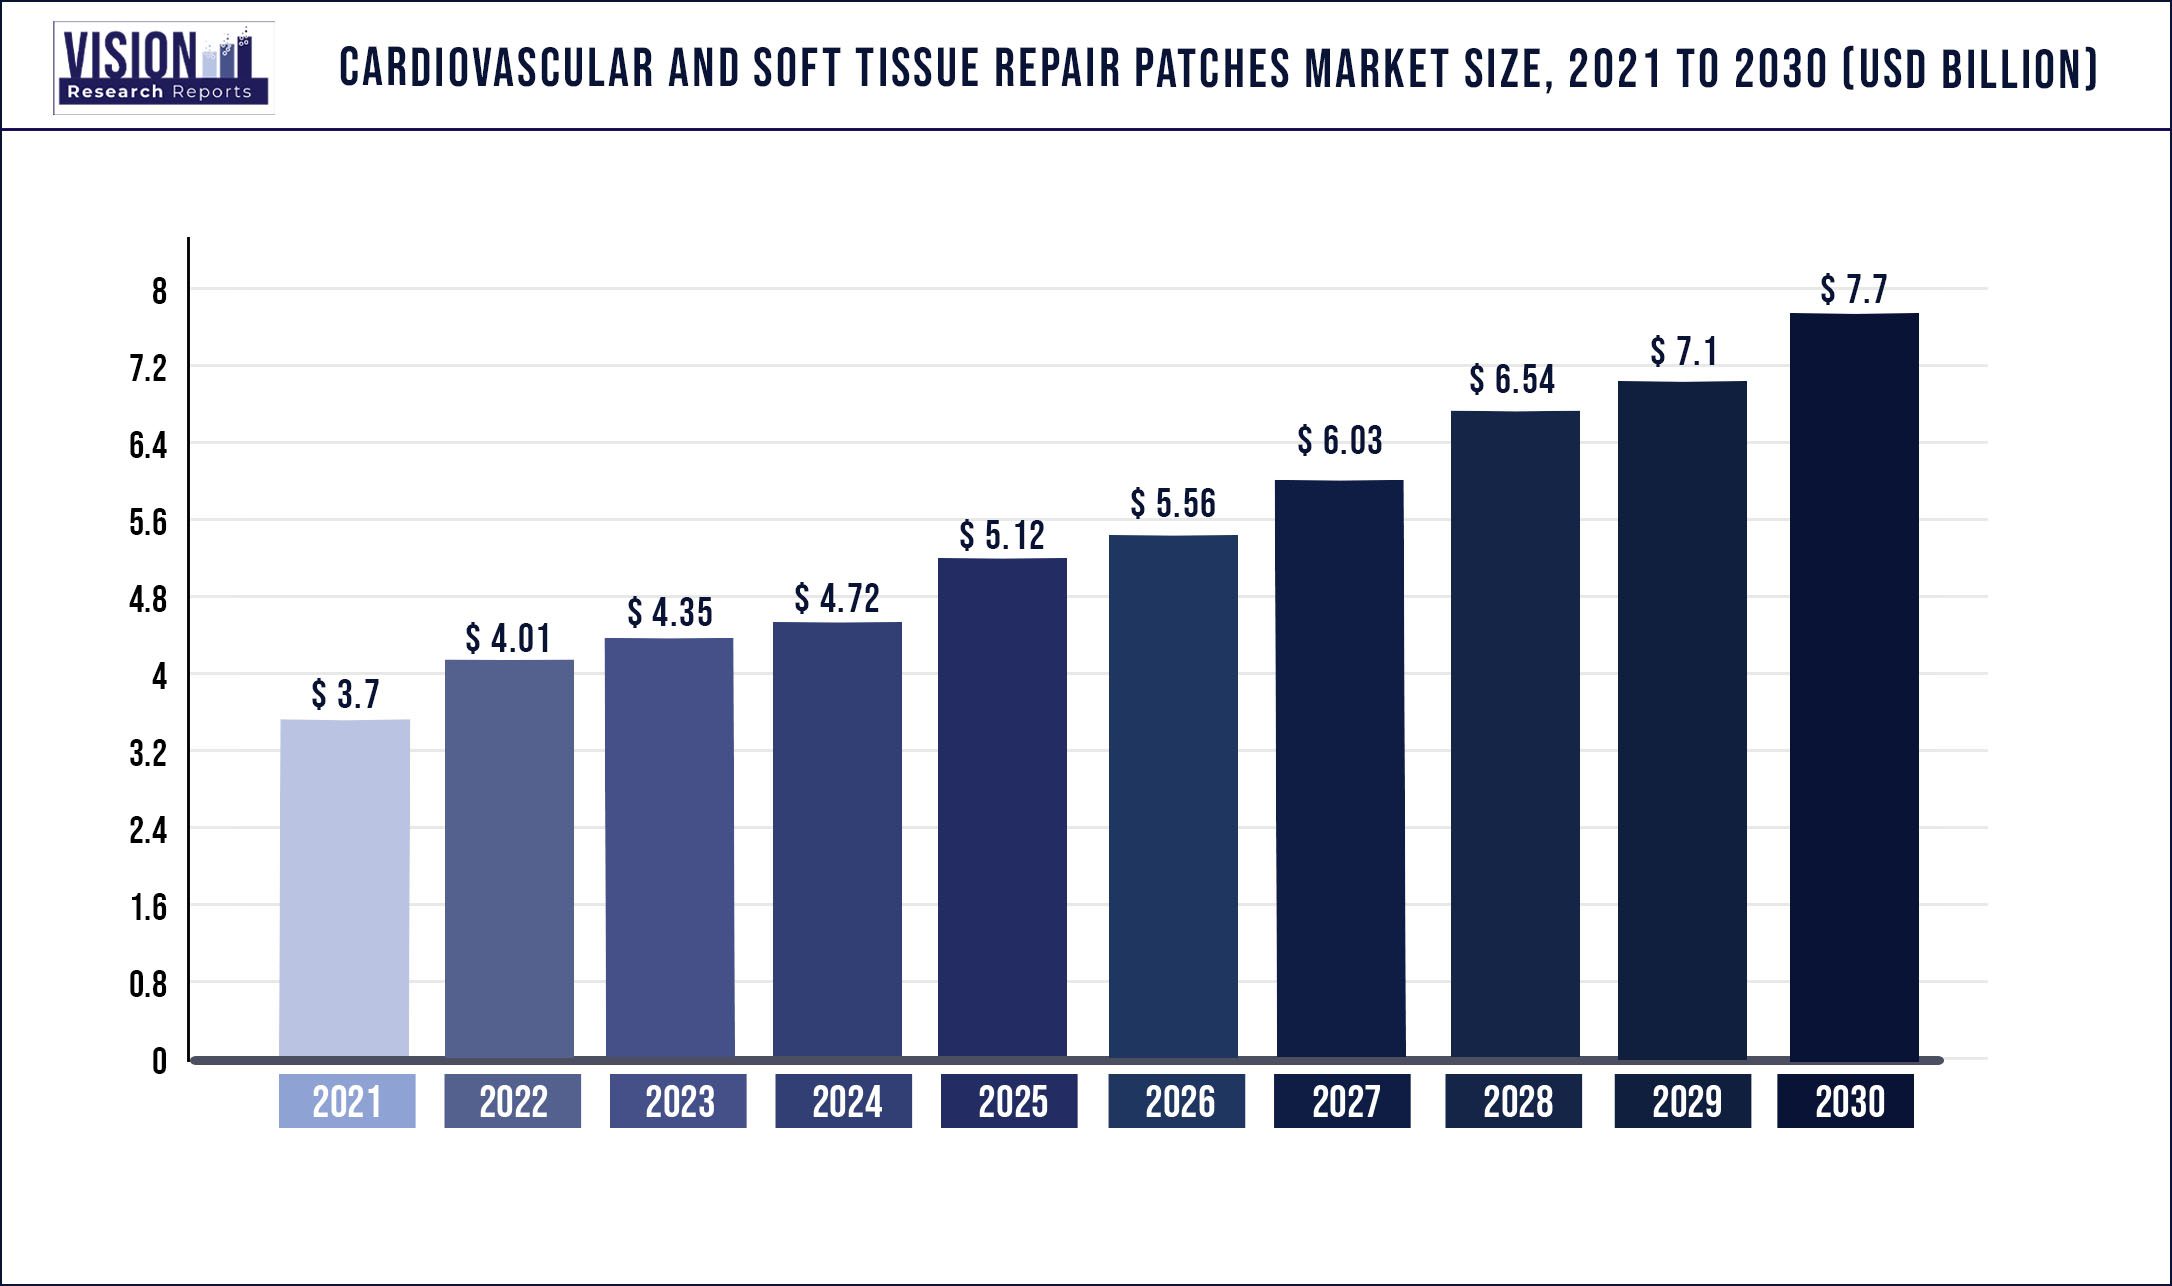 Cardiovascular And Soft Tissue Repair Patches Market Size 2021 to 2030